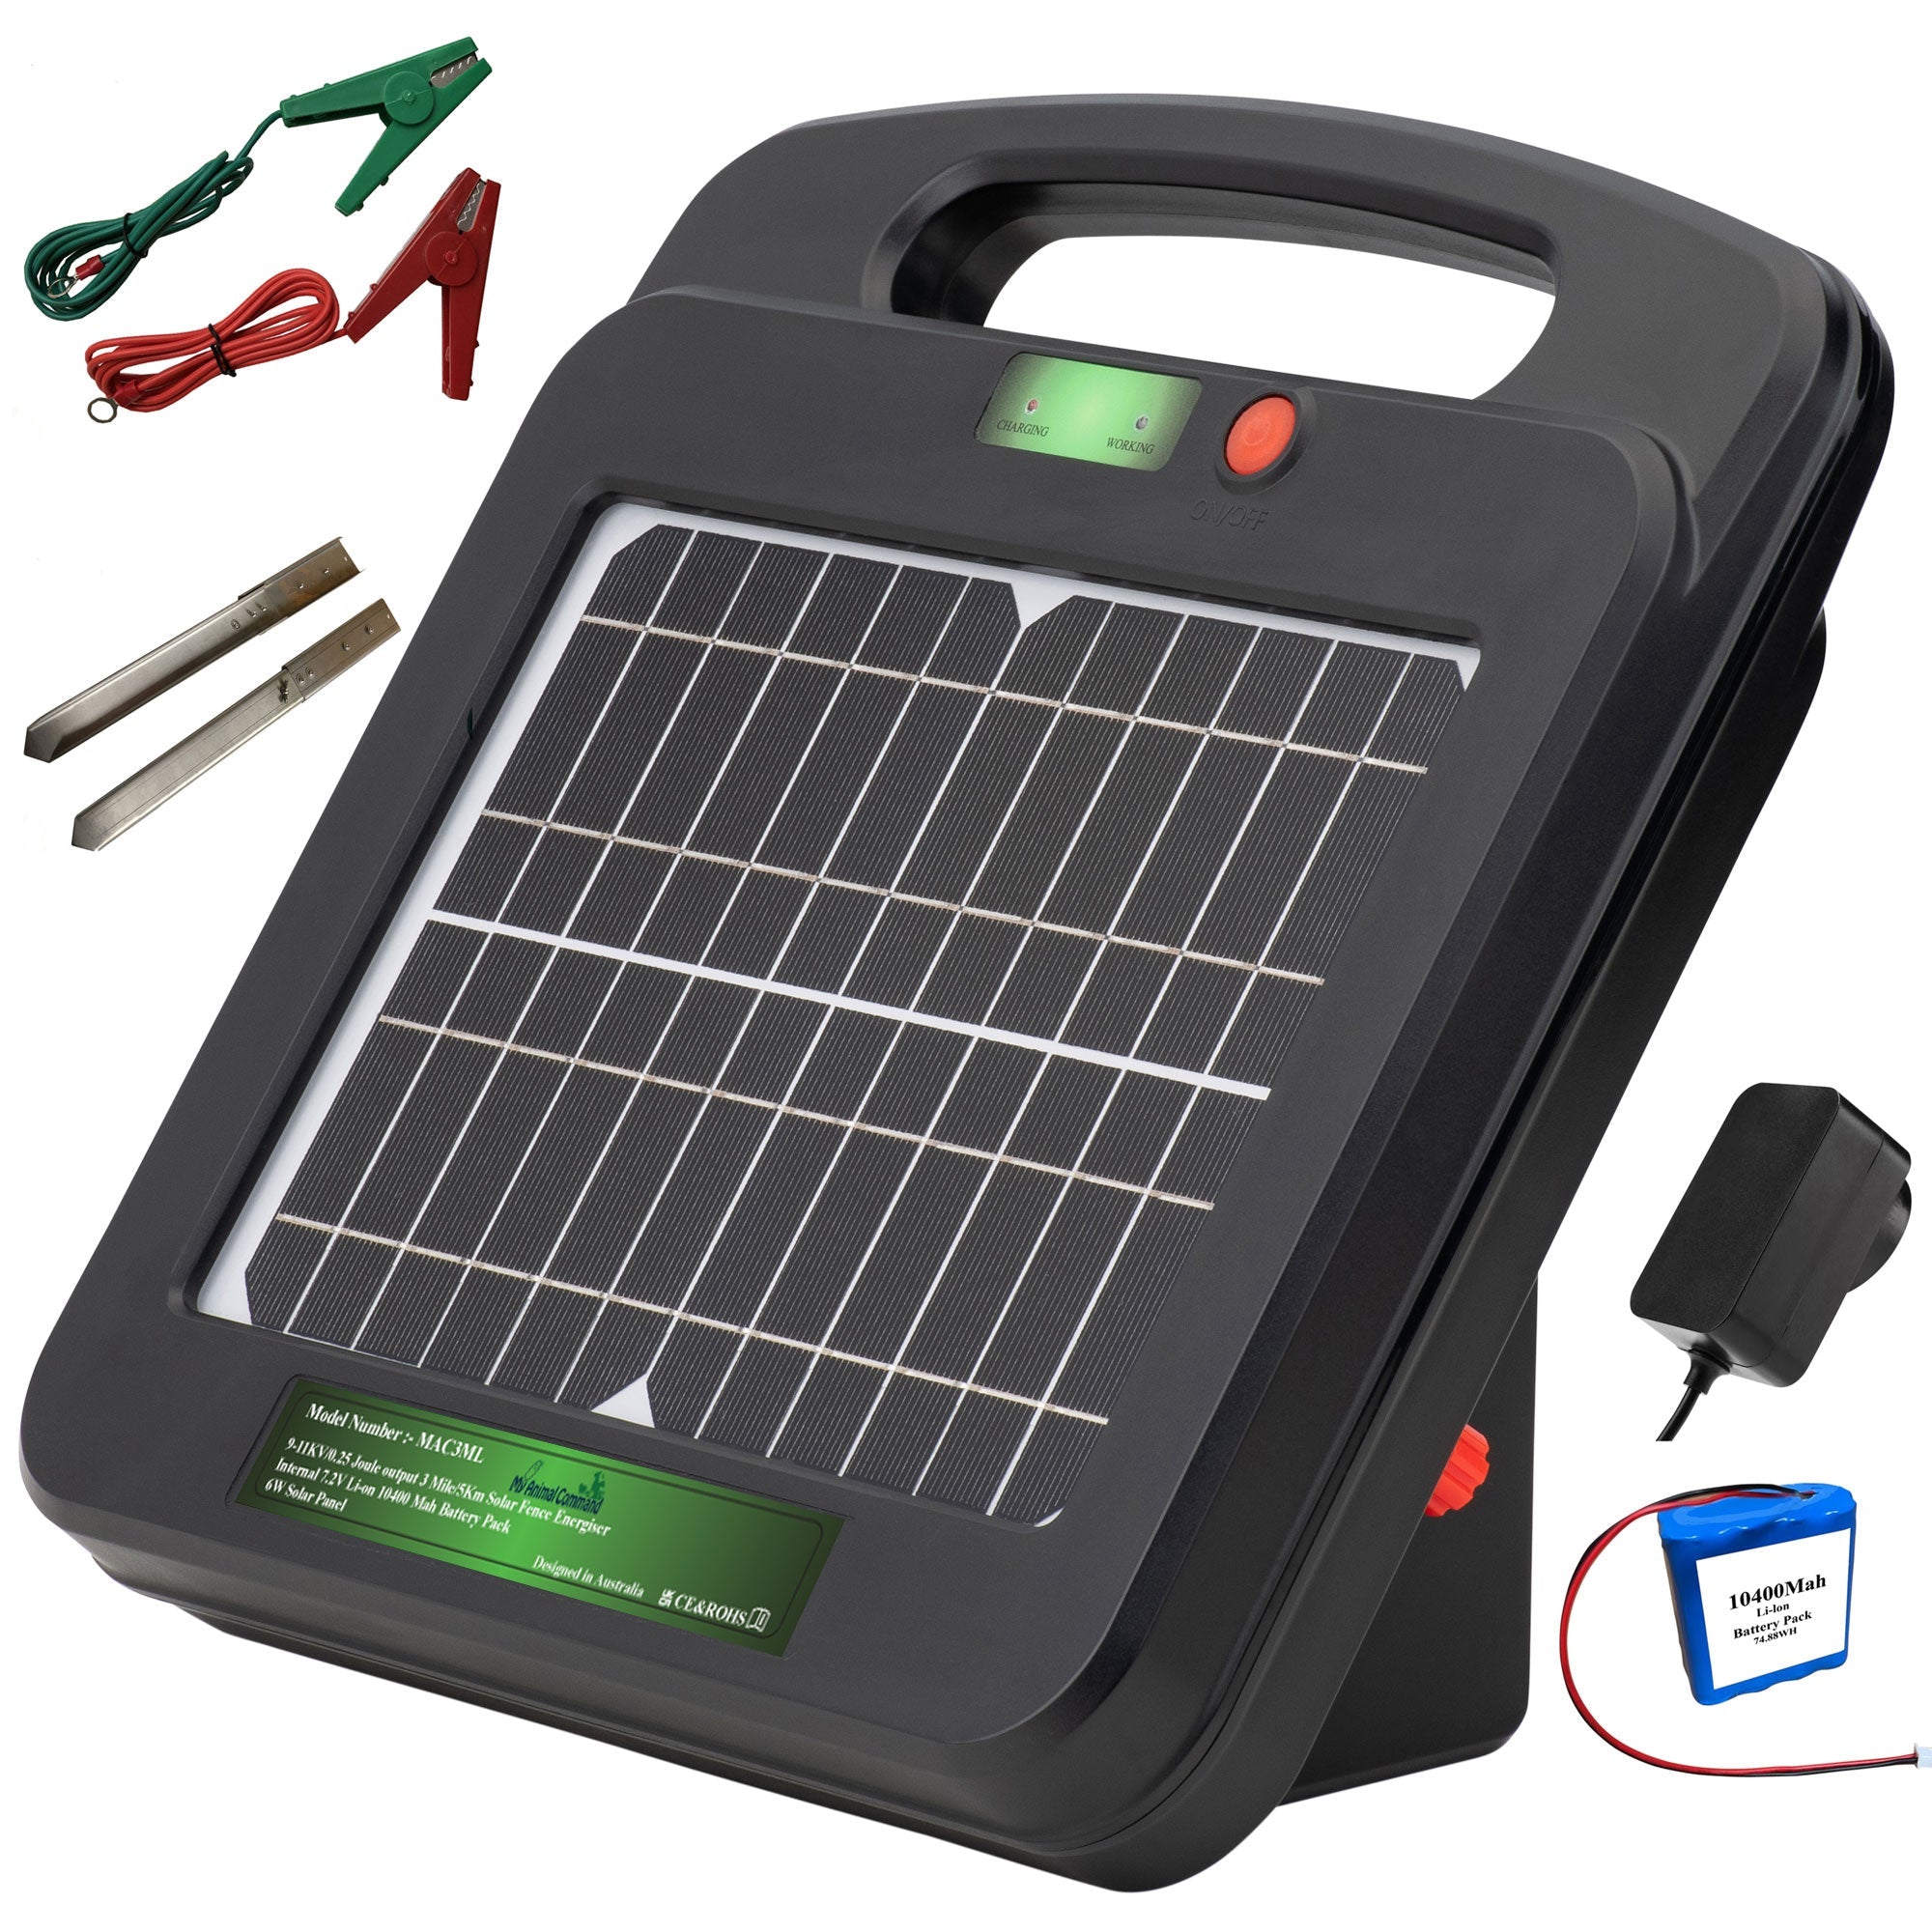 Portable Solar Powered Energiser Charger for Electric Fence 3 Mile 0.25 Joules (9-11KV) - My Pet Command